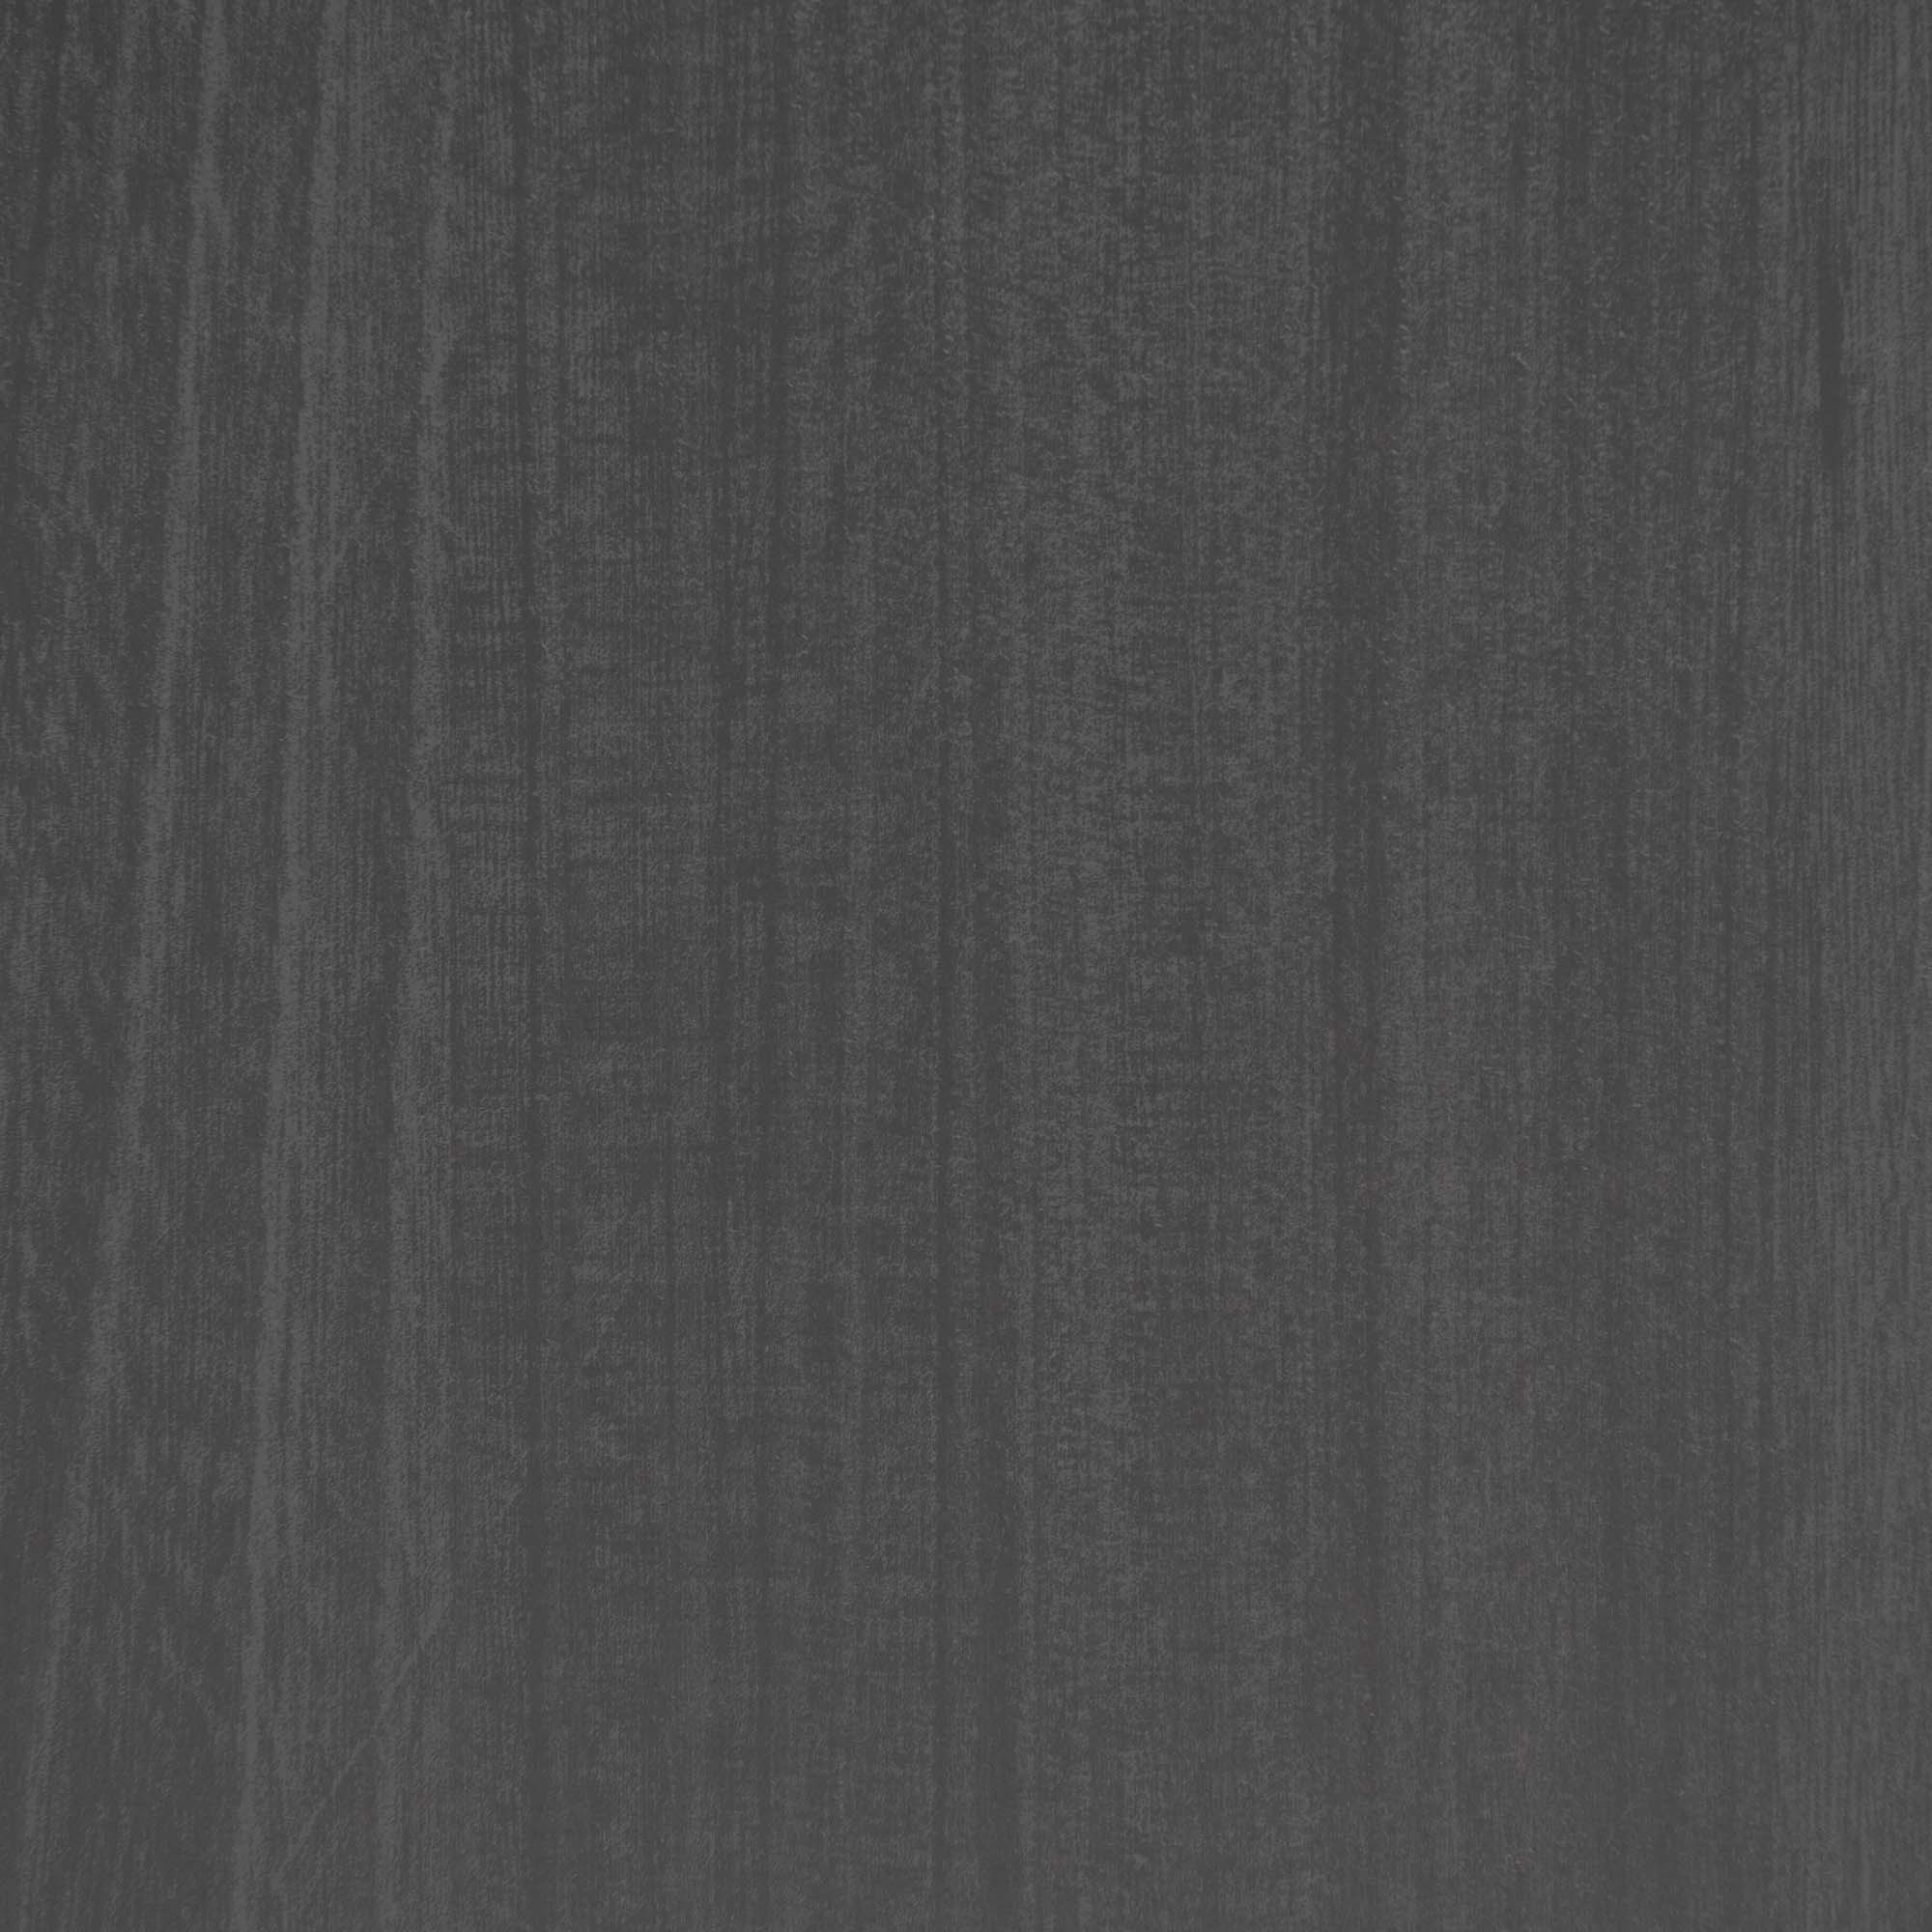 Mod Cabinetry Euro Line Textura Gris Plomo Solid Wood Texture